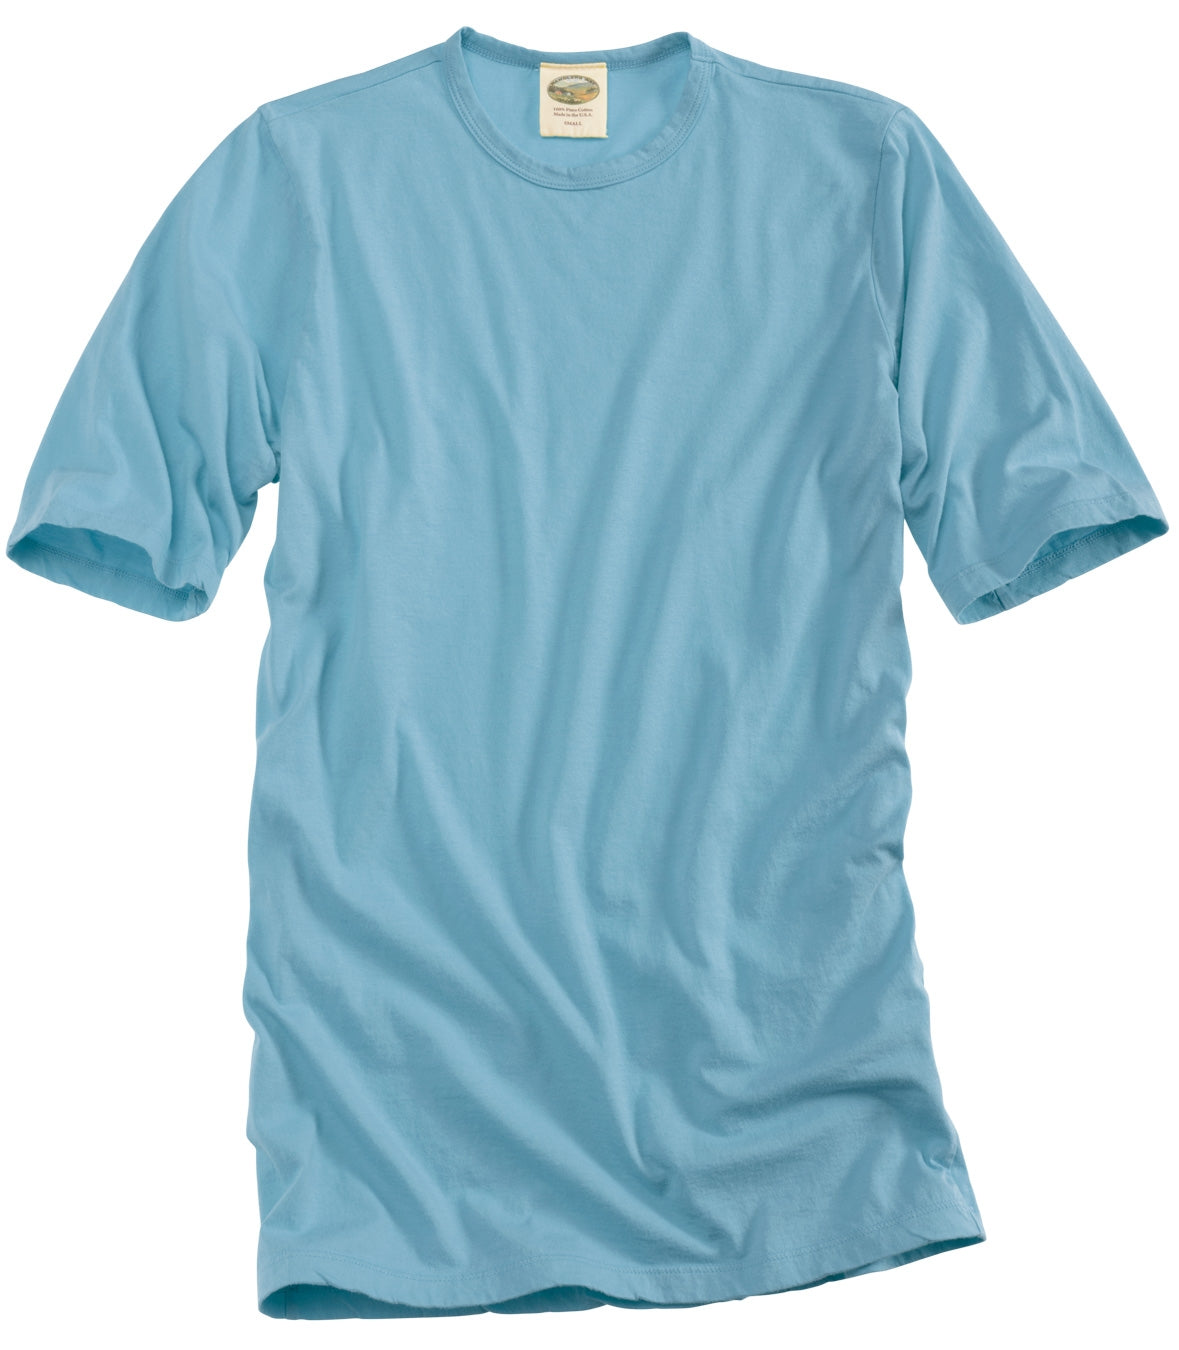 Cotton Crew Neck Tee - Short Sleeve Made in USA | RAMBLERS WAY